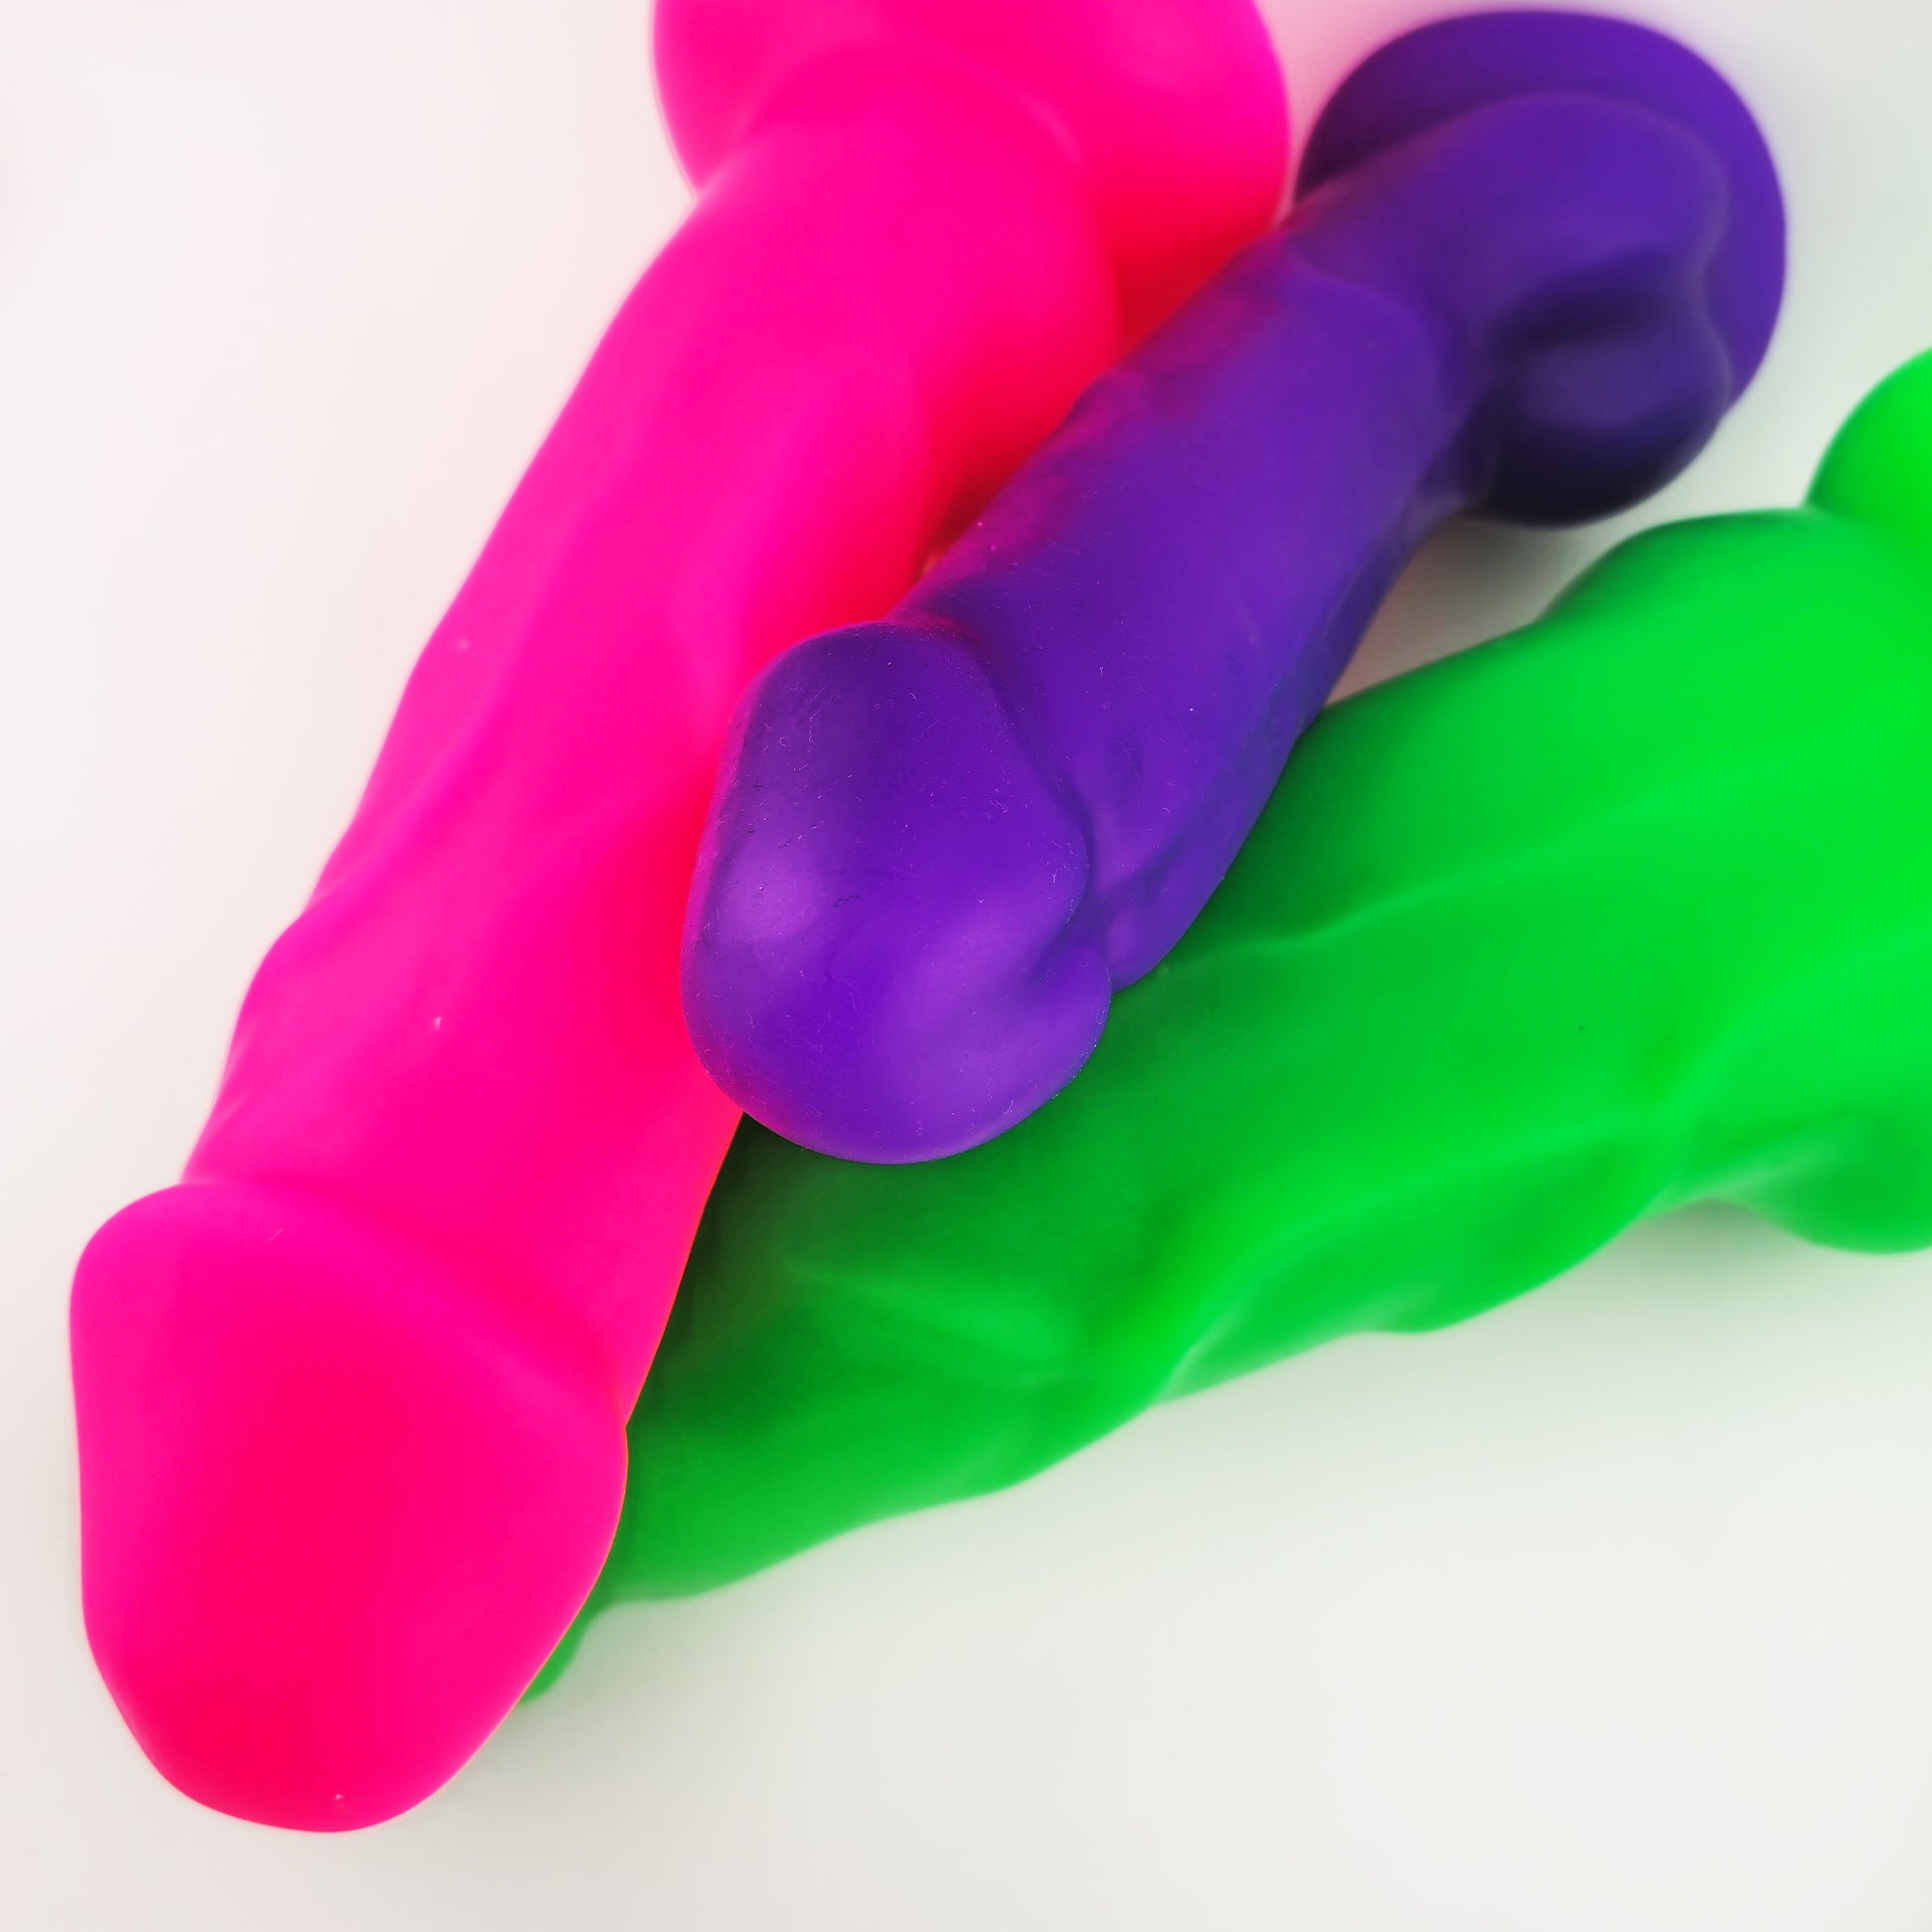 Brat Breakers Daaaddy Silicone dildo in three sizes. Pink, Purple and green dildos